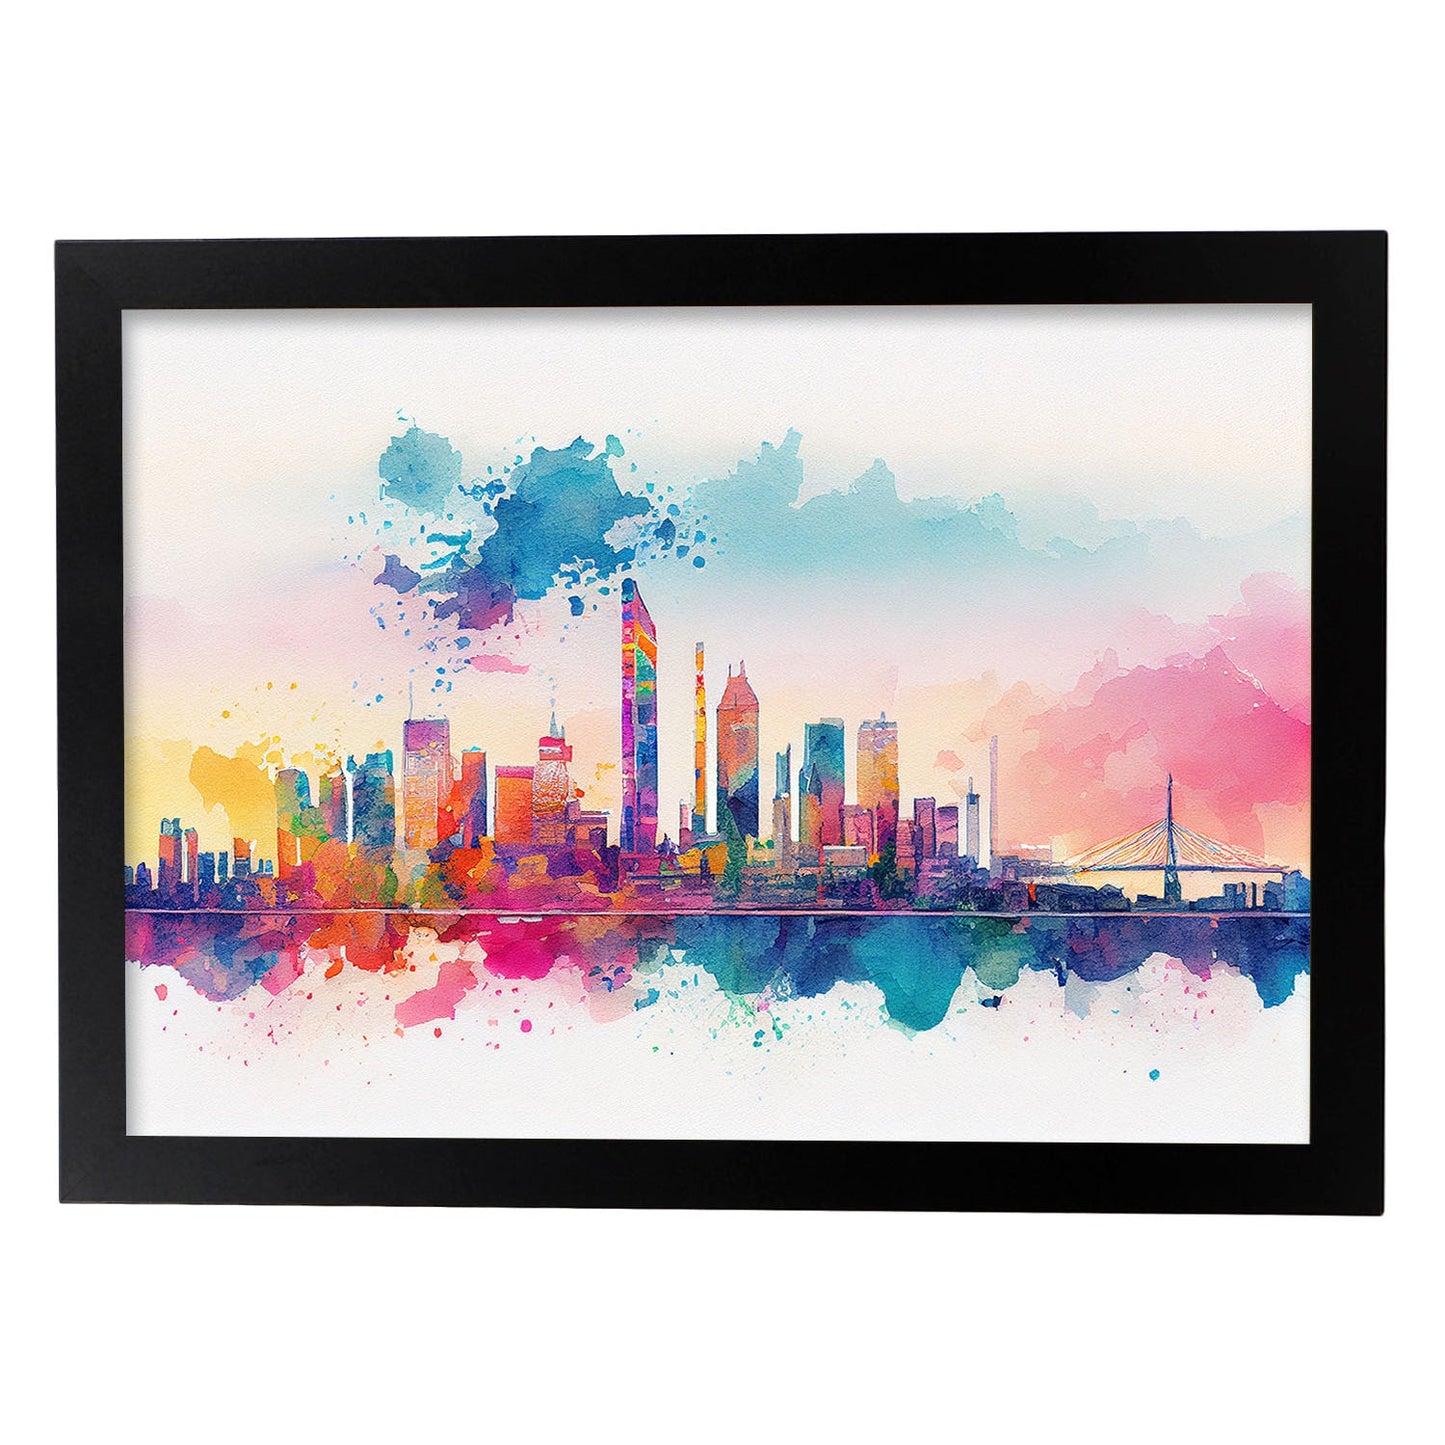 Nacnic watercolor of a skyline of the city of Osaka. Aesthetic Wall Art Prints for Bedroom or Living Room Design.